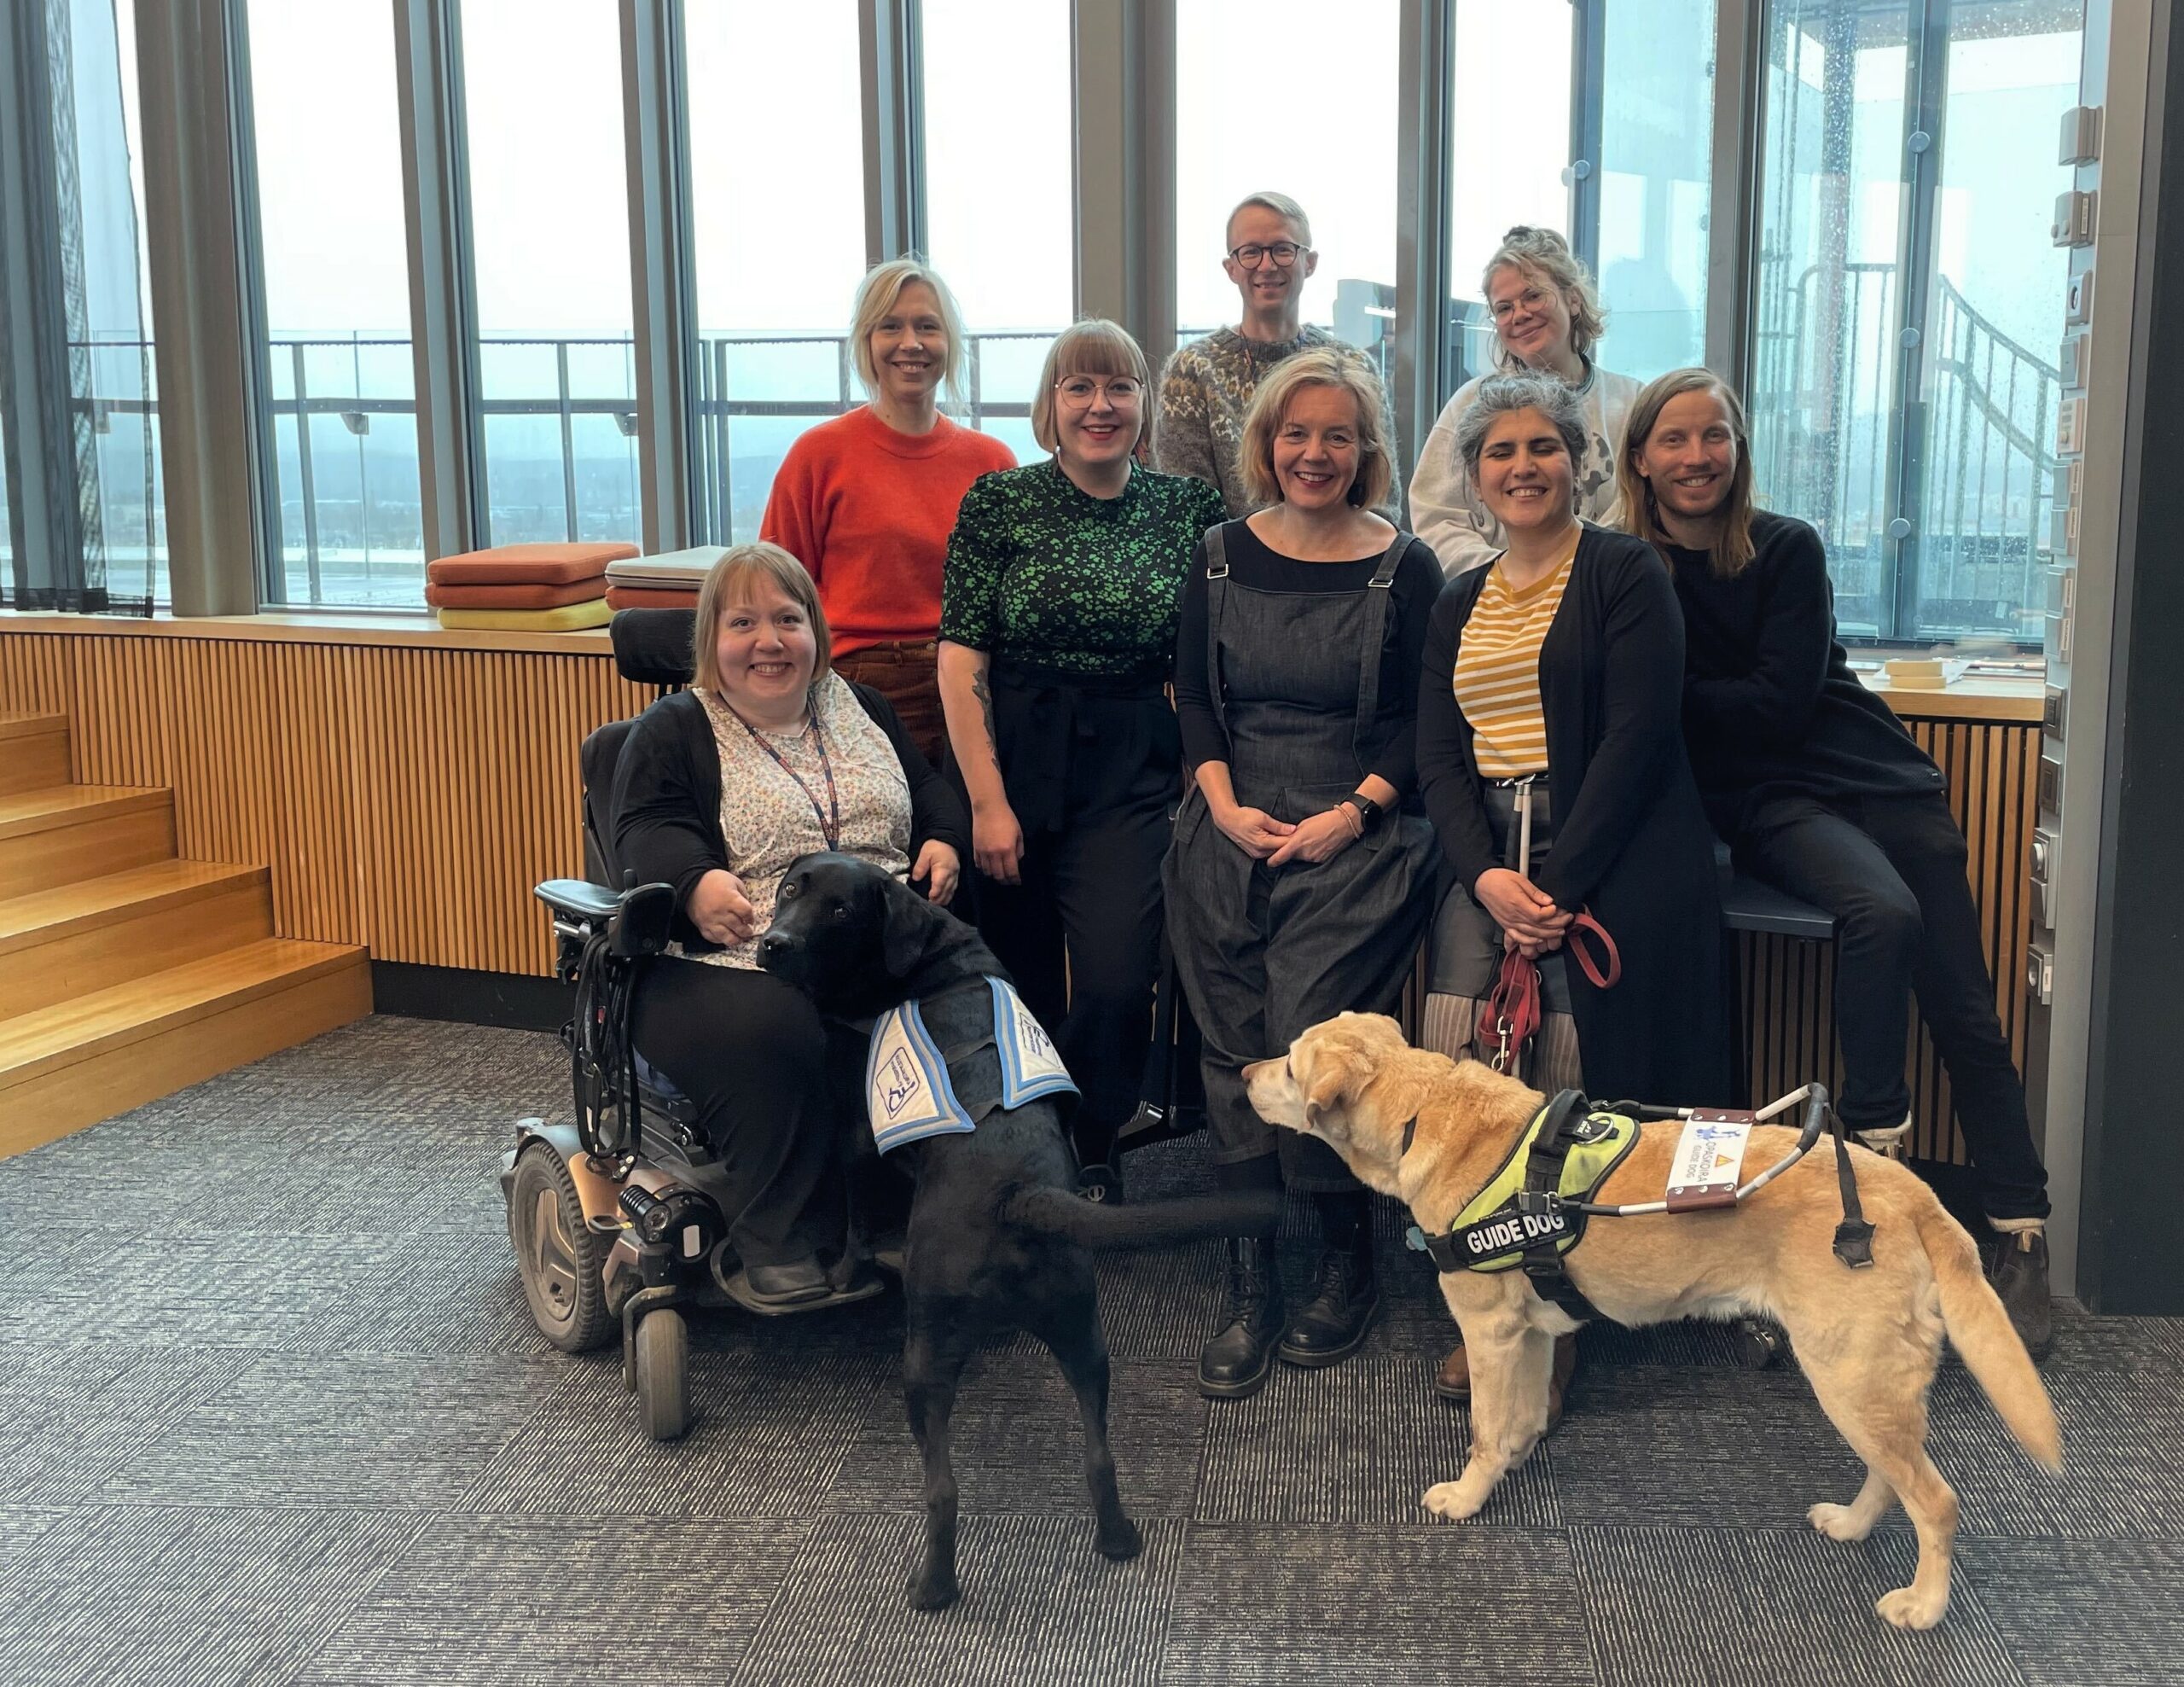 8 people smiles to the camera in front of a window. One of them uses a wheelchair, one has a white walking stick on the hand. In the front there is a guide dog and an assistance dog. Three people wears glasses.